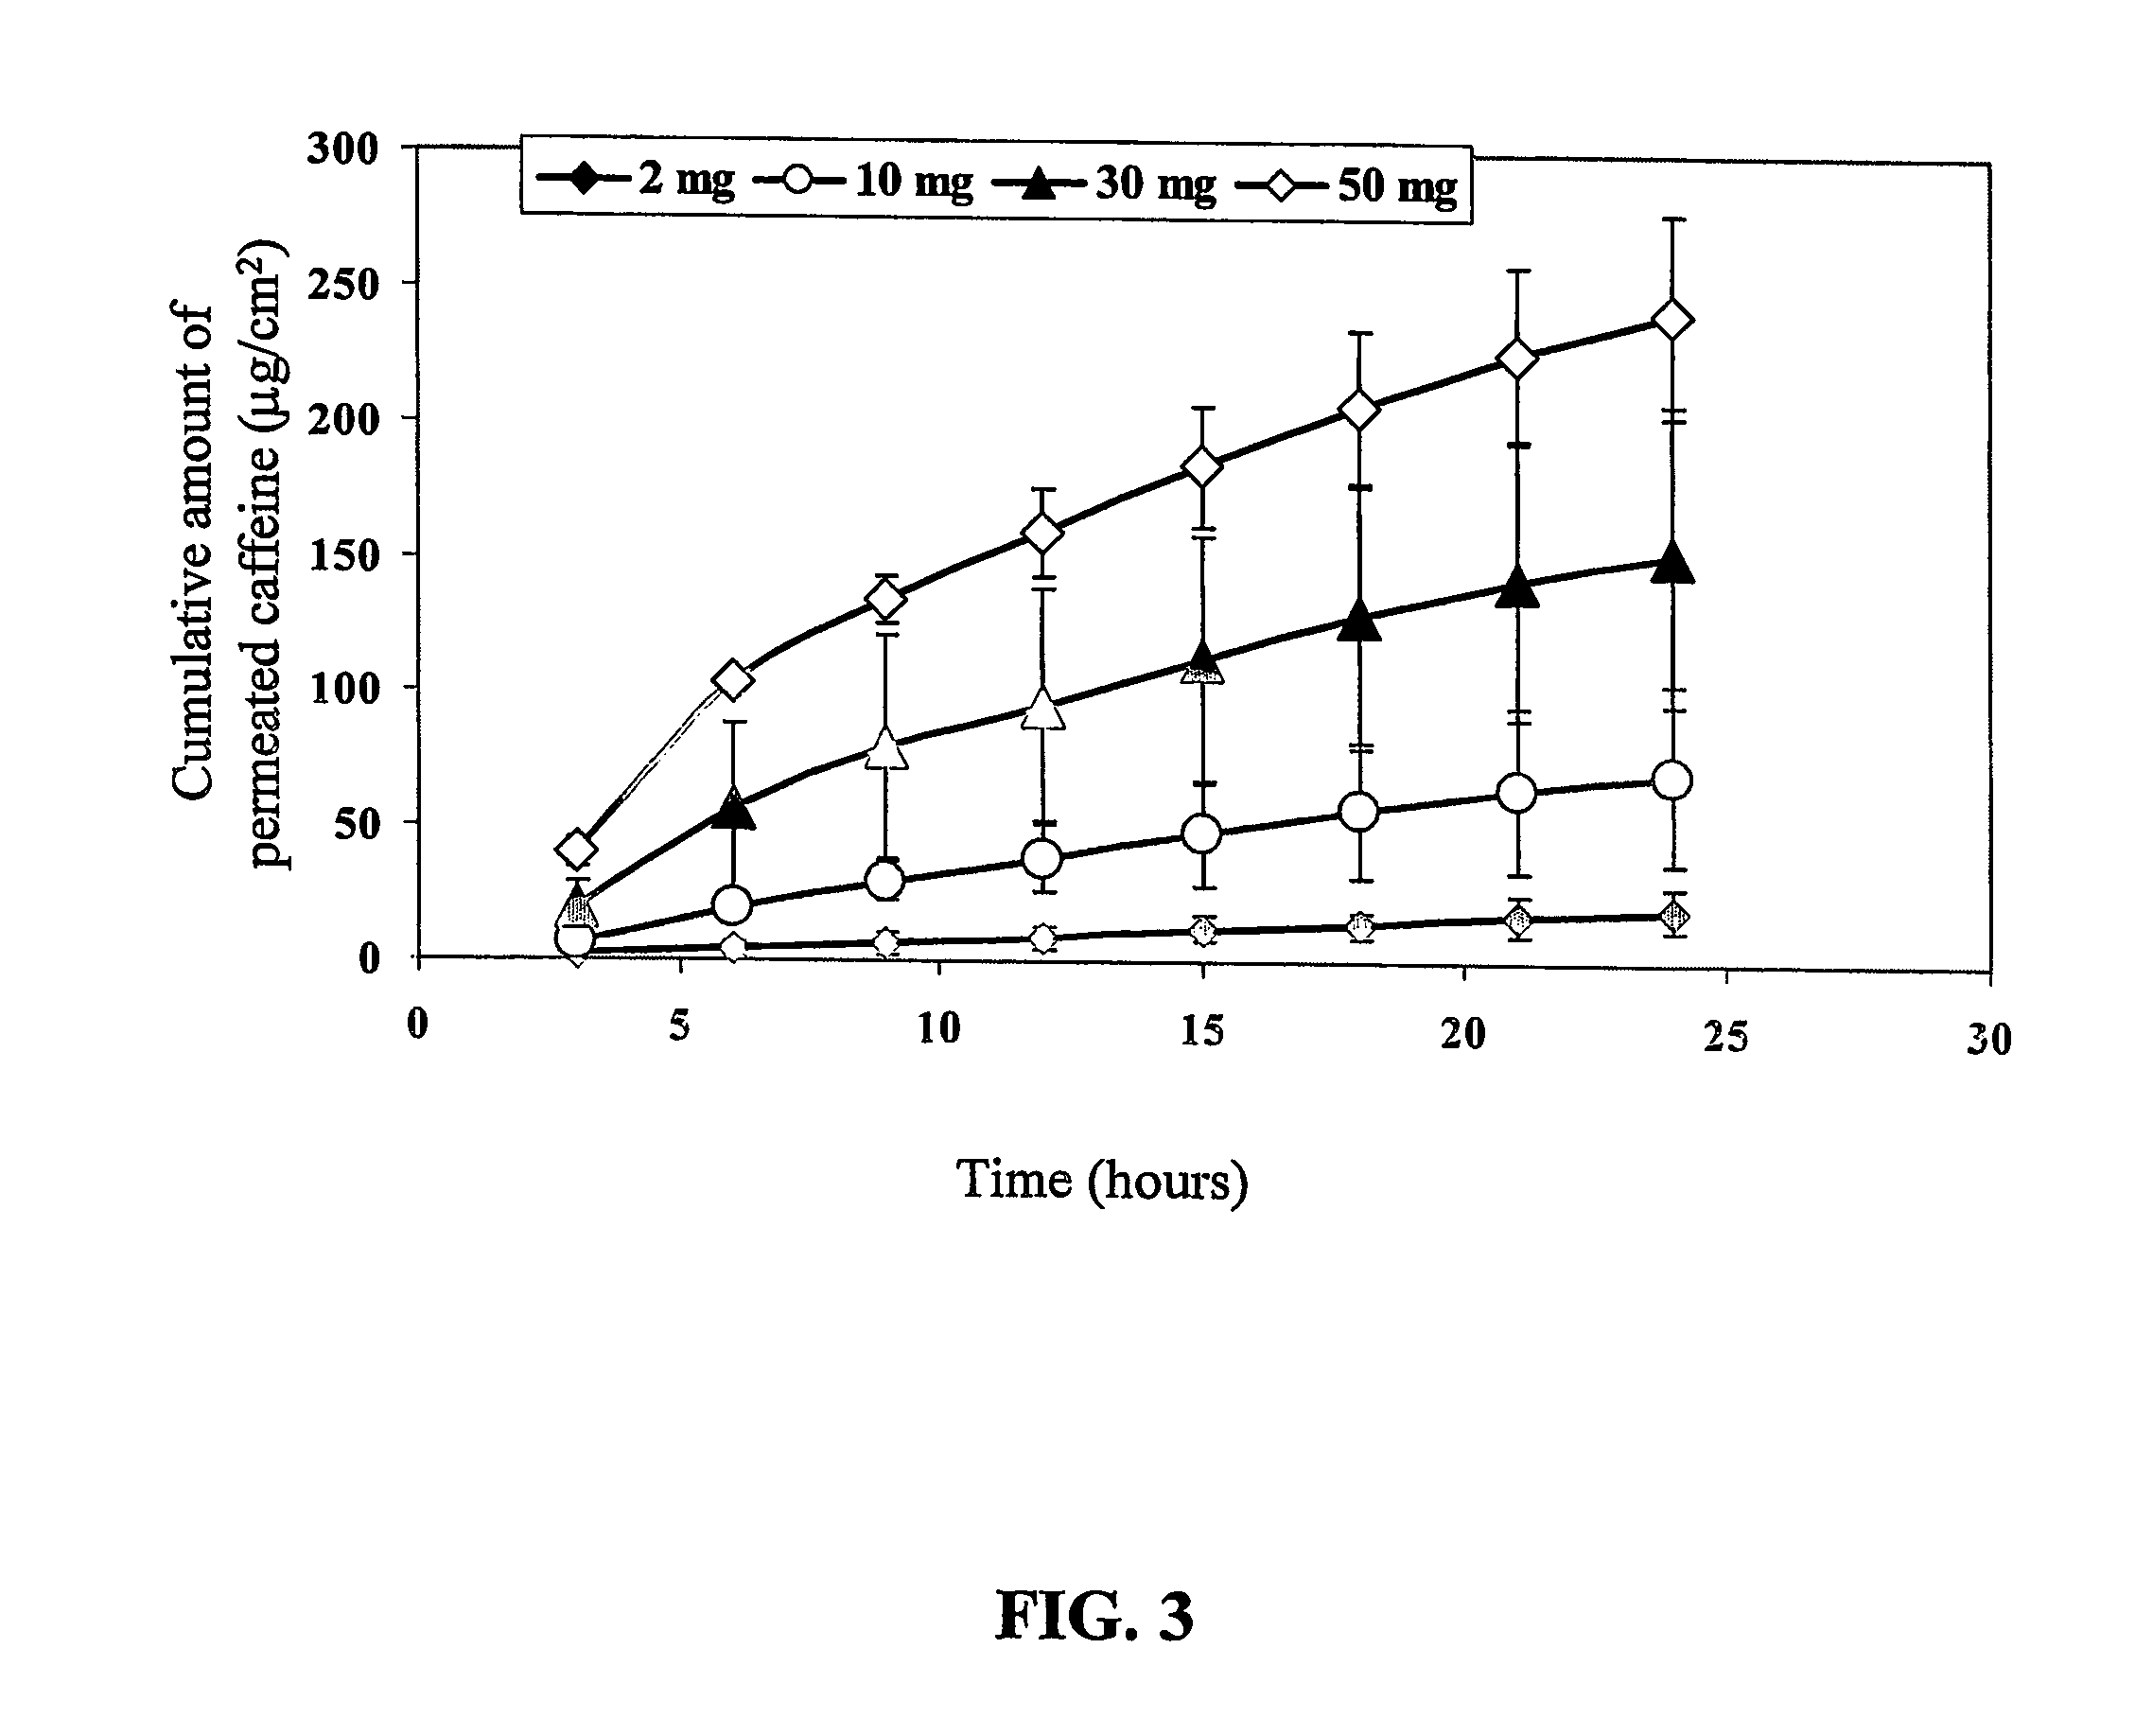 Transdermal Delivery System for Cosmetic Agents